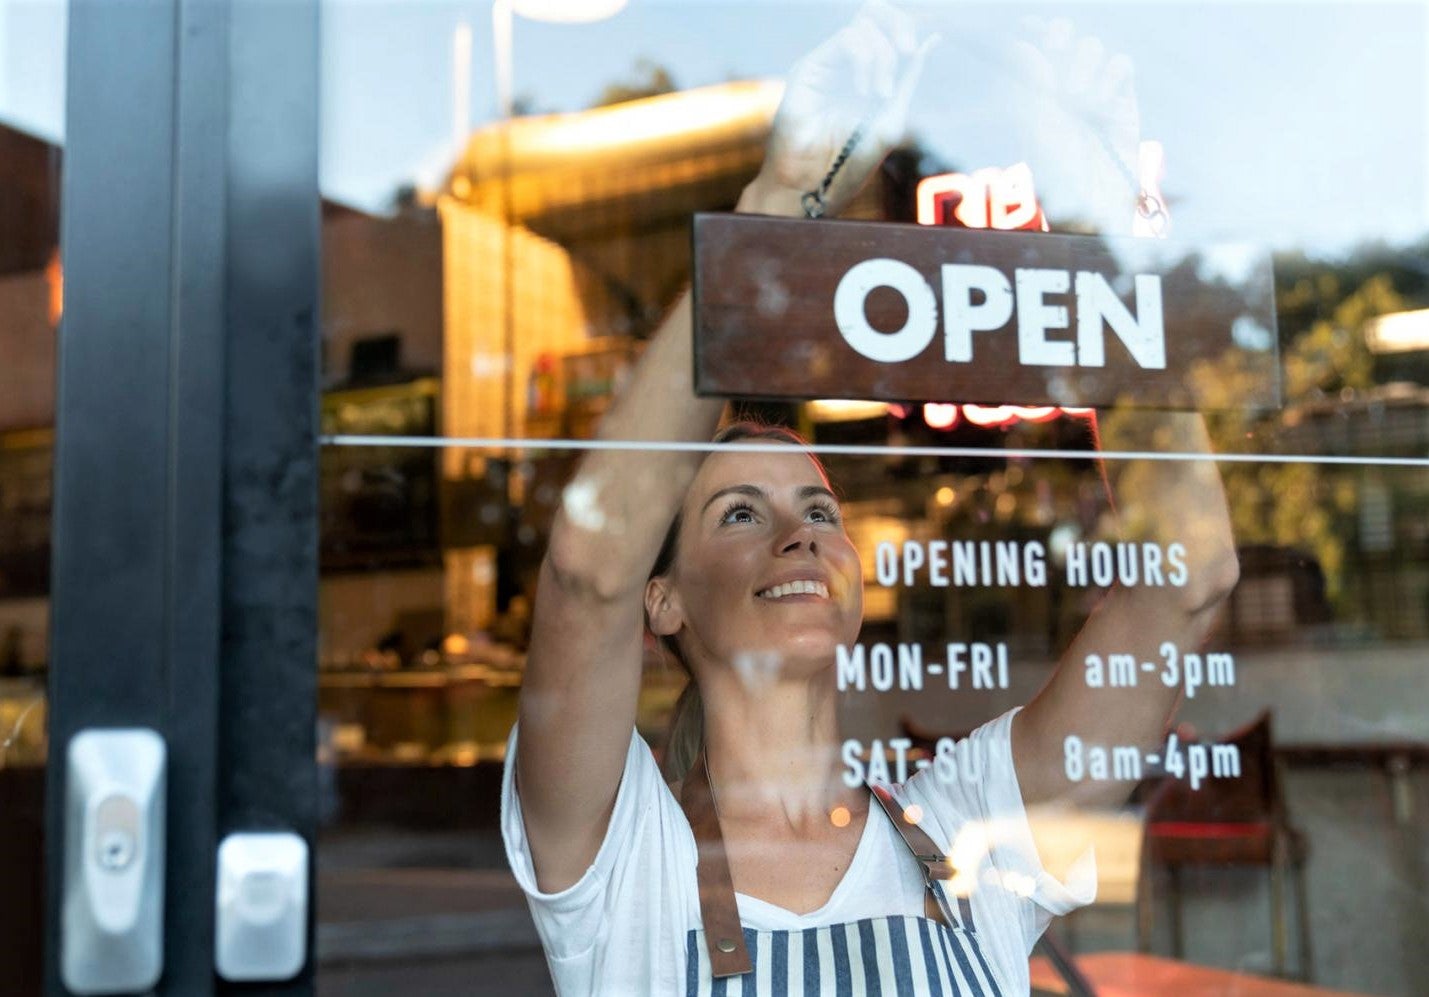 Things to Consider When Opening a Restaurant